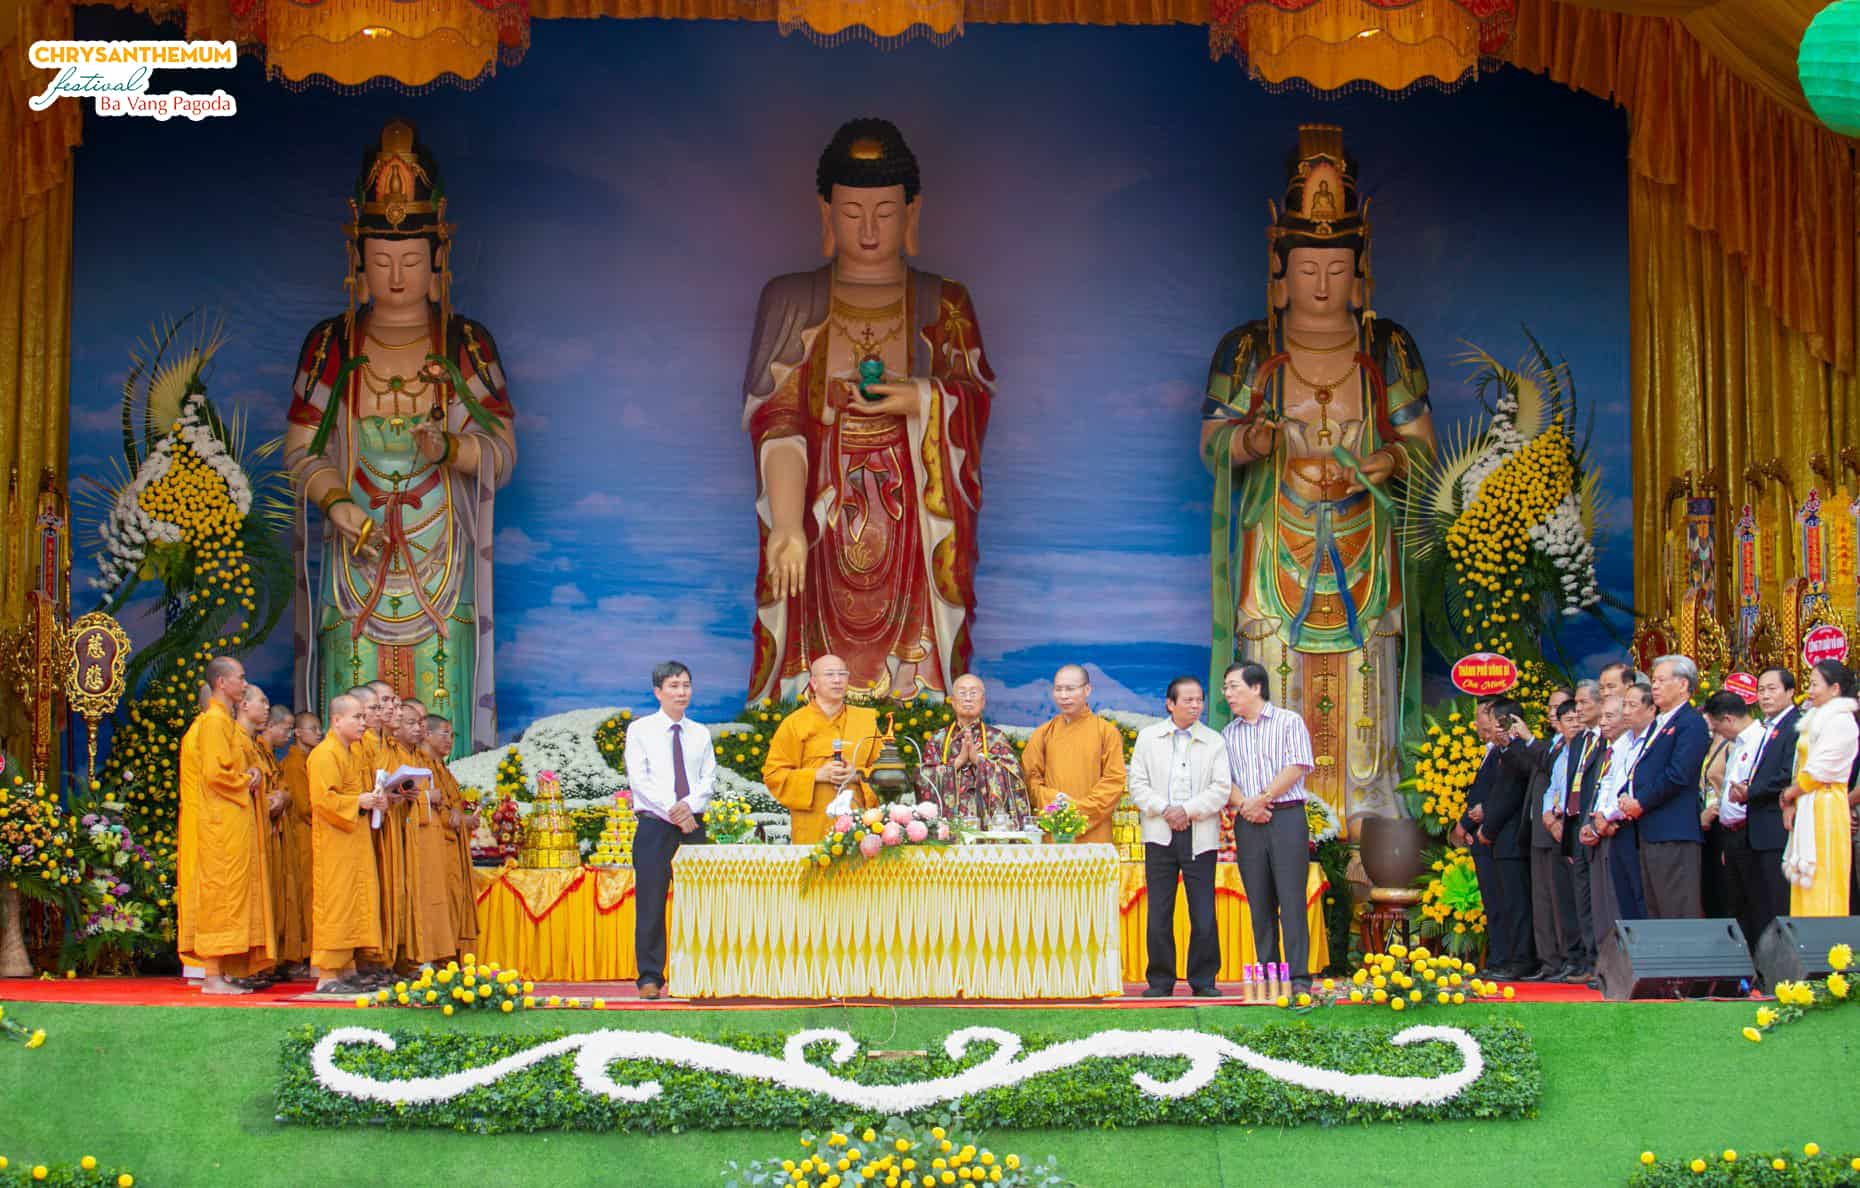 Tea-making rites to offer to Buddhas